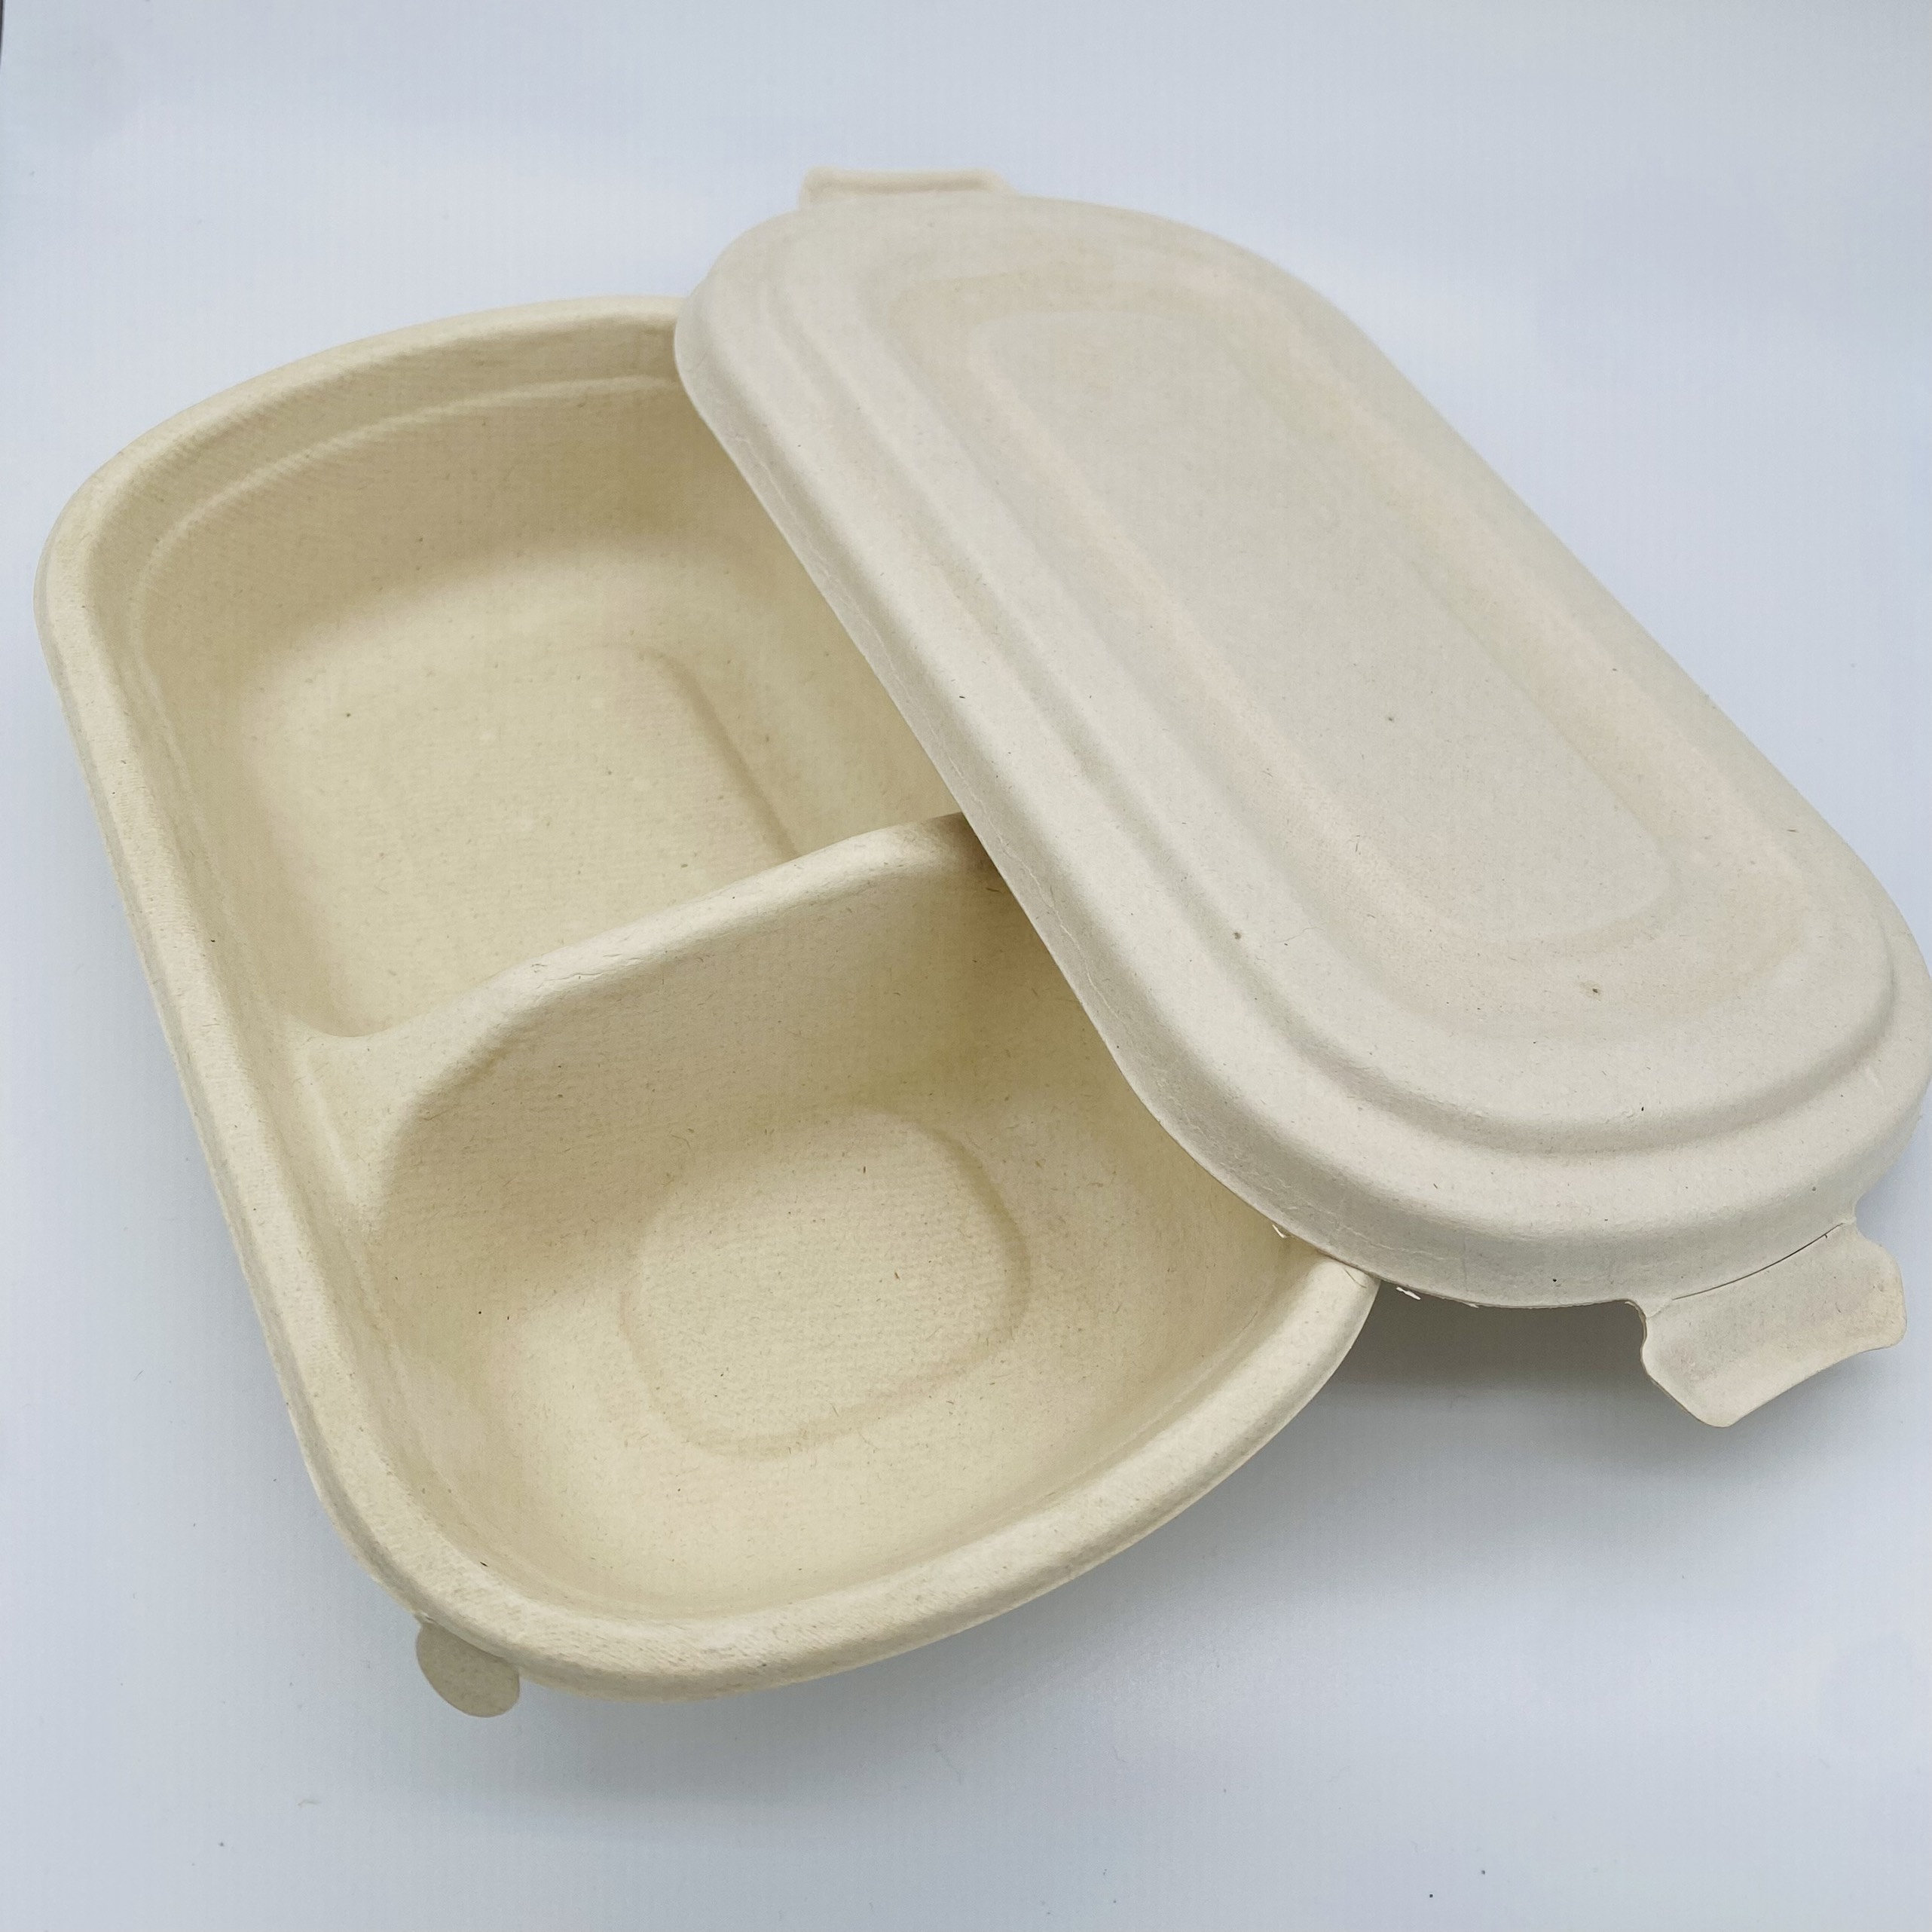 100% Compostable Clamshell Take Out Food Containers [6x6 50-Pack]  Heavy-Duty Quality to go Containers, Natural Disposable Bagasse, Eco-Friendly  Biodegradable Made of Sugar Cane Fibers - A World Of Deals